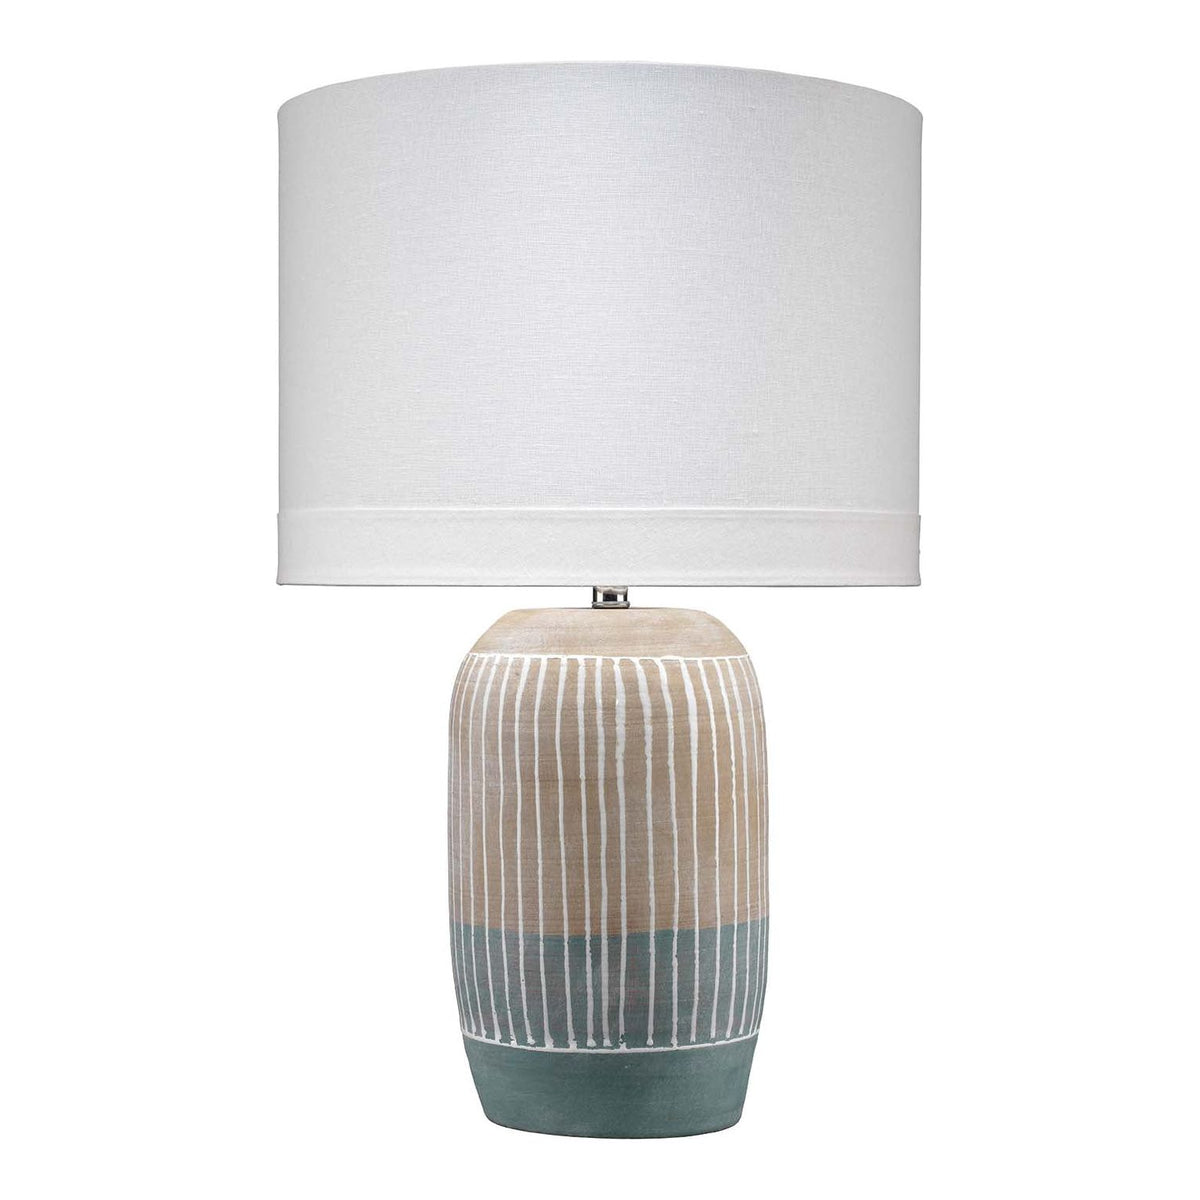 Jamie Young Company - 9FLAGTLSLATE - Flagstaff Table Lamp - Flagstaff - Blue